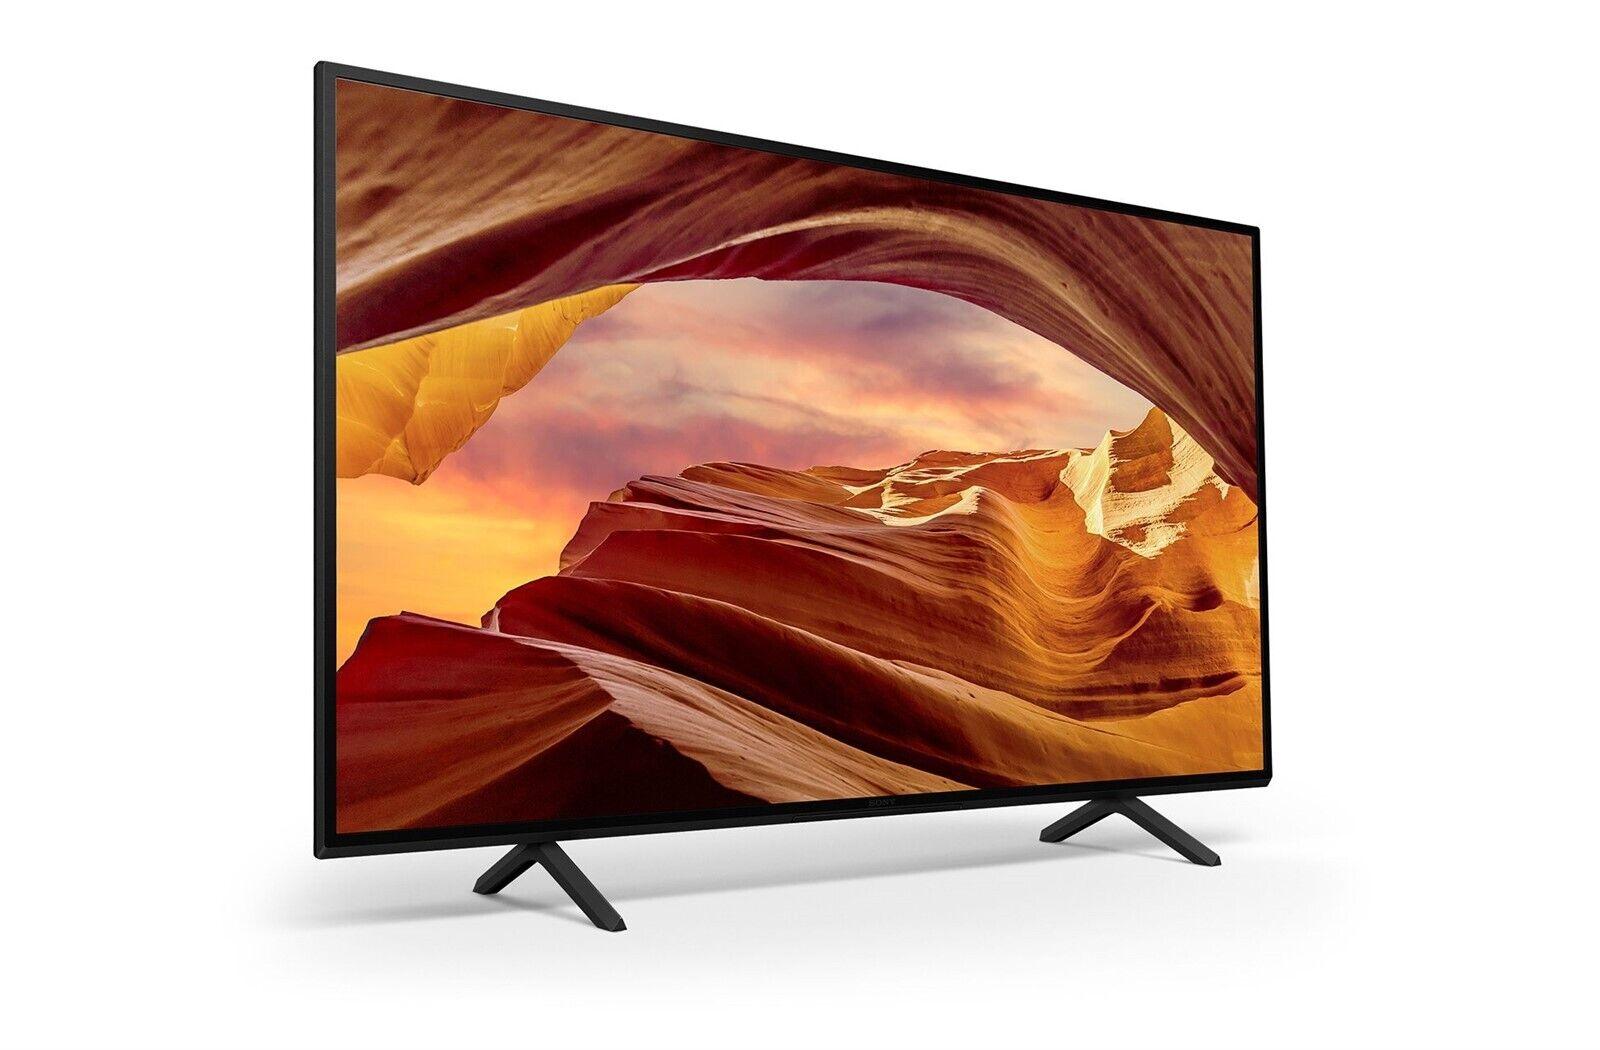 Sony 50 In KD50X75WL Smart 4K UHD HDR LED Freeview TV U COLLECTION ONLY NO STAND - Smart Clear Vision